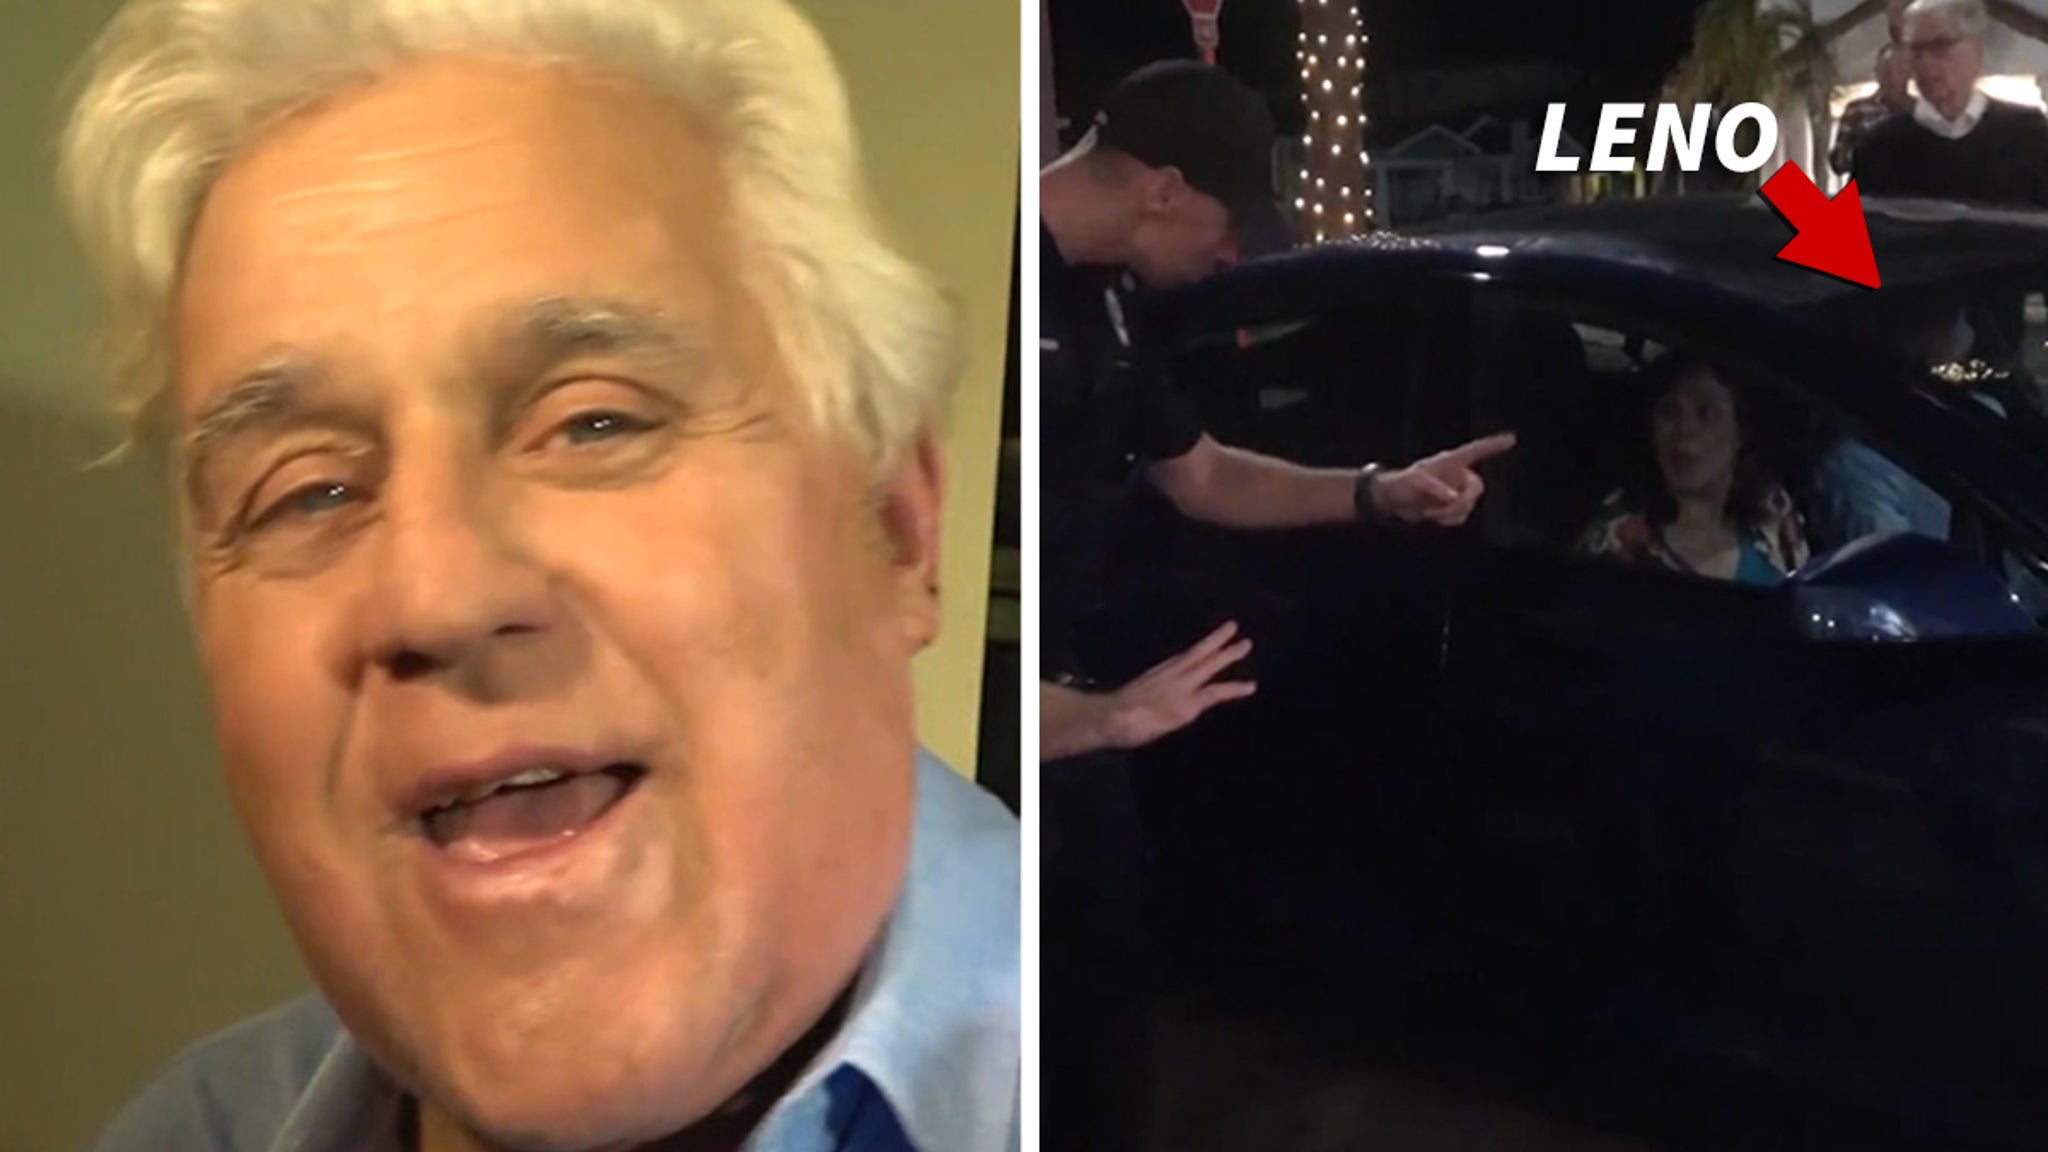 Jay Leno Arrives for First Comedy Gig Since Getting Burned, Grazes Cop Car